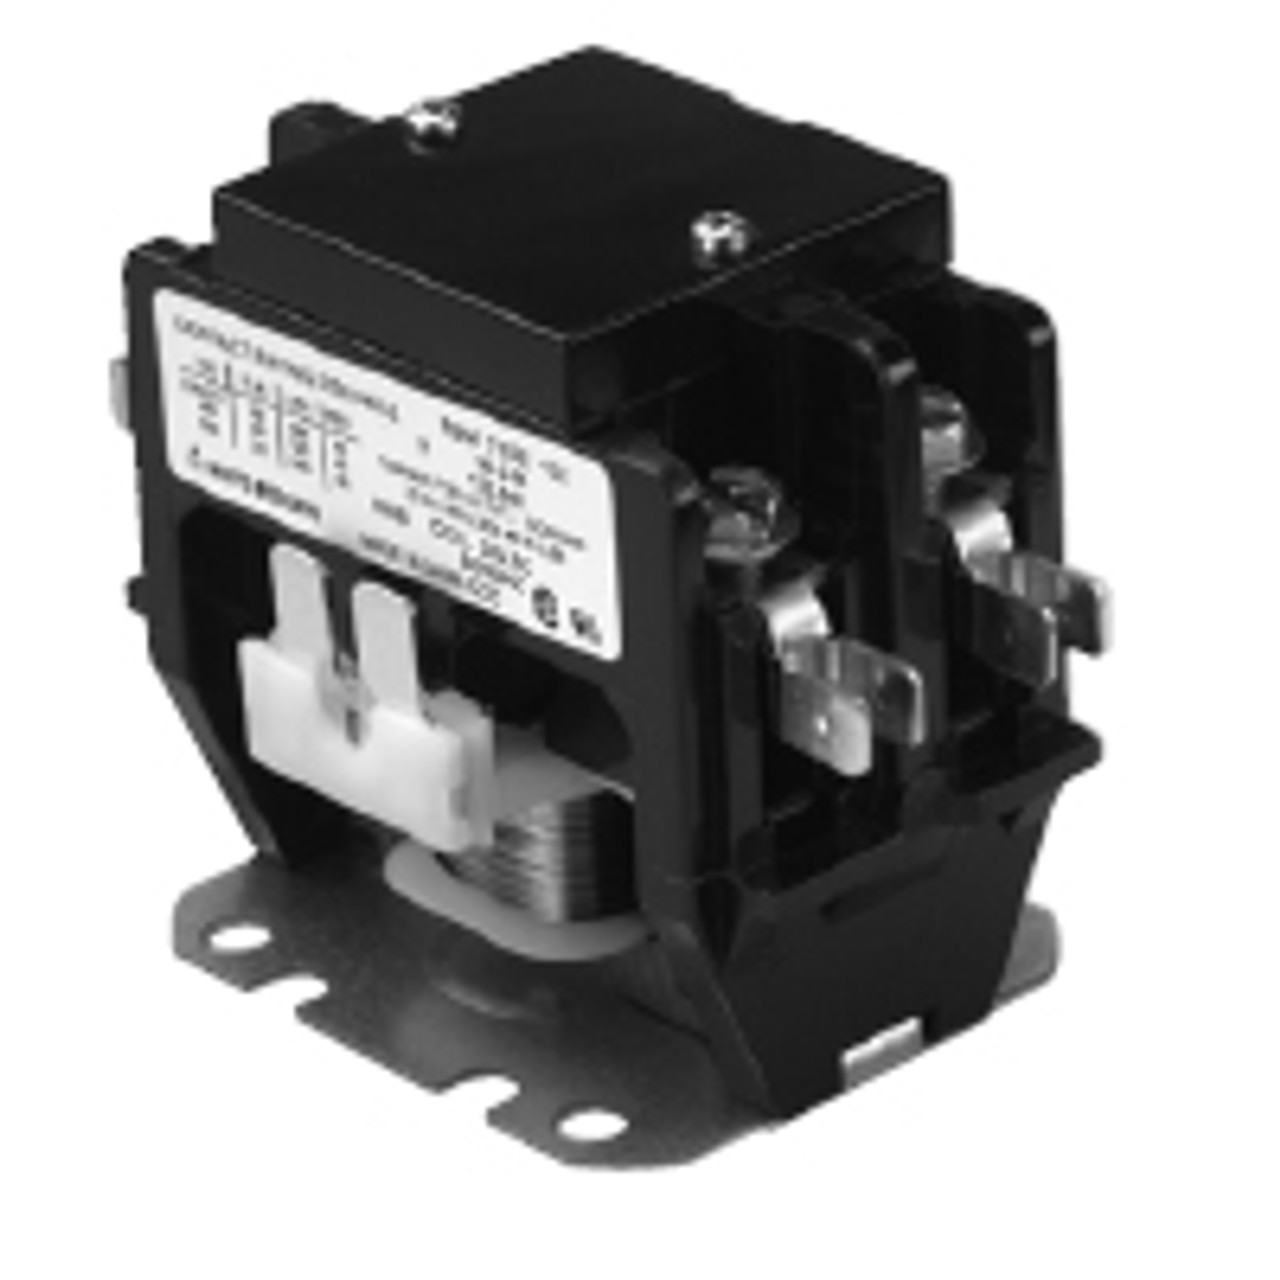 Stancor / White Rodgers 124-906 Power Contactors